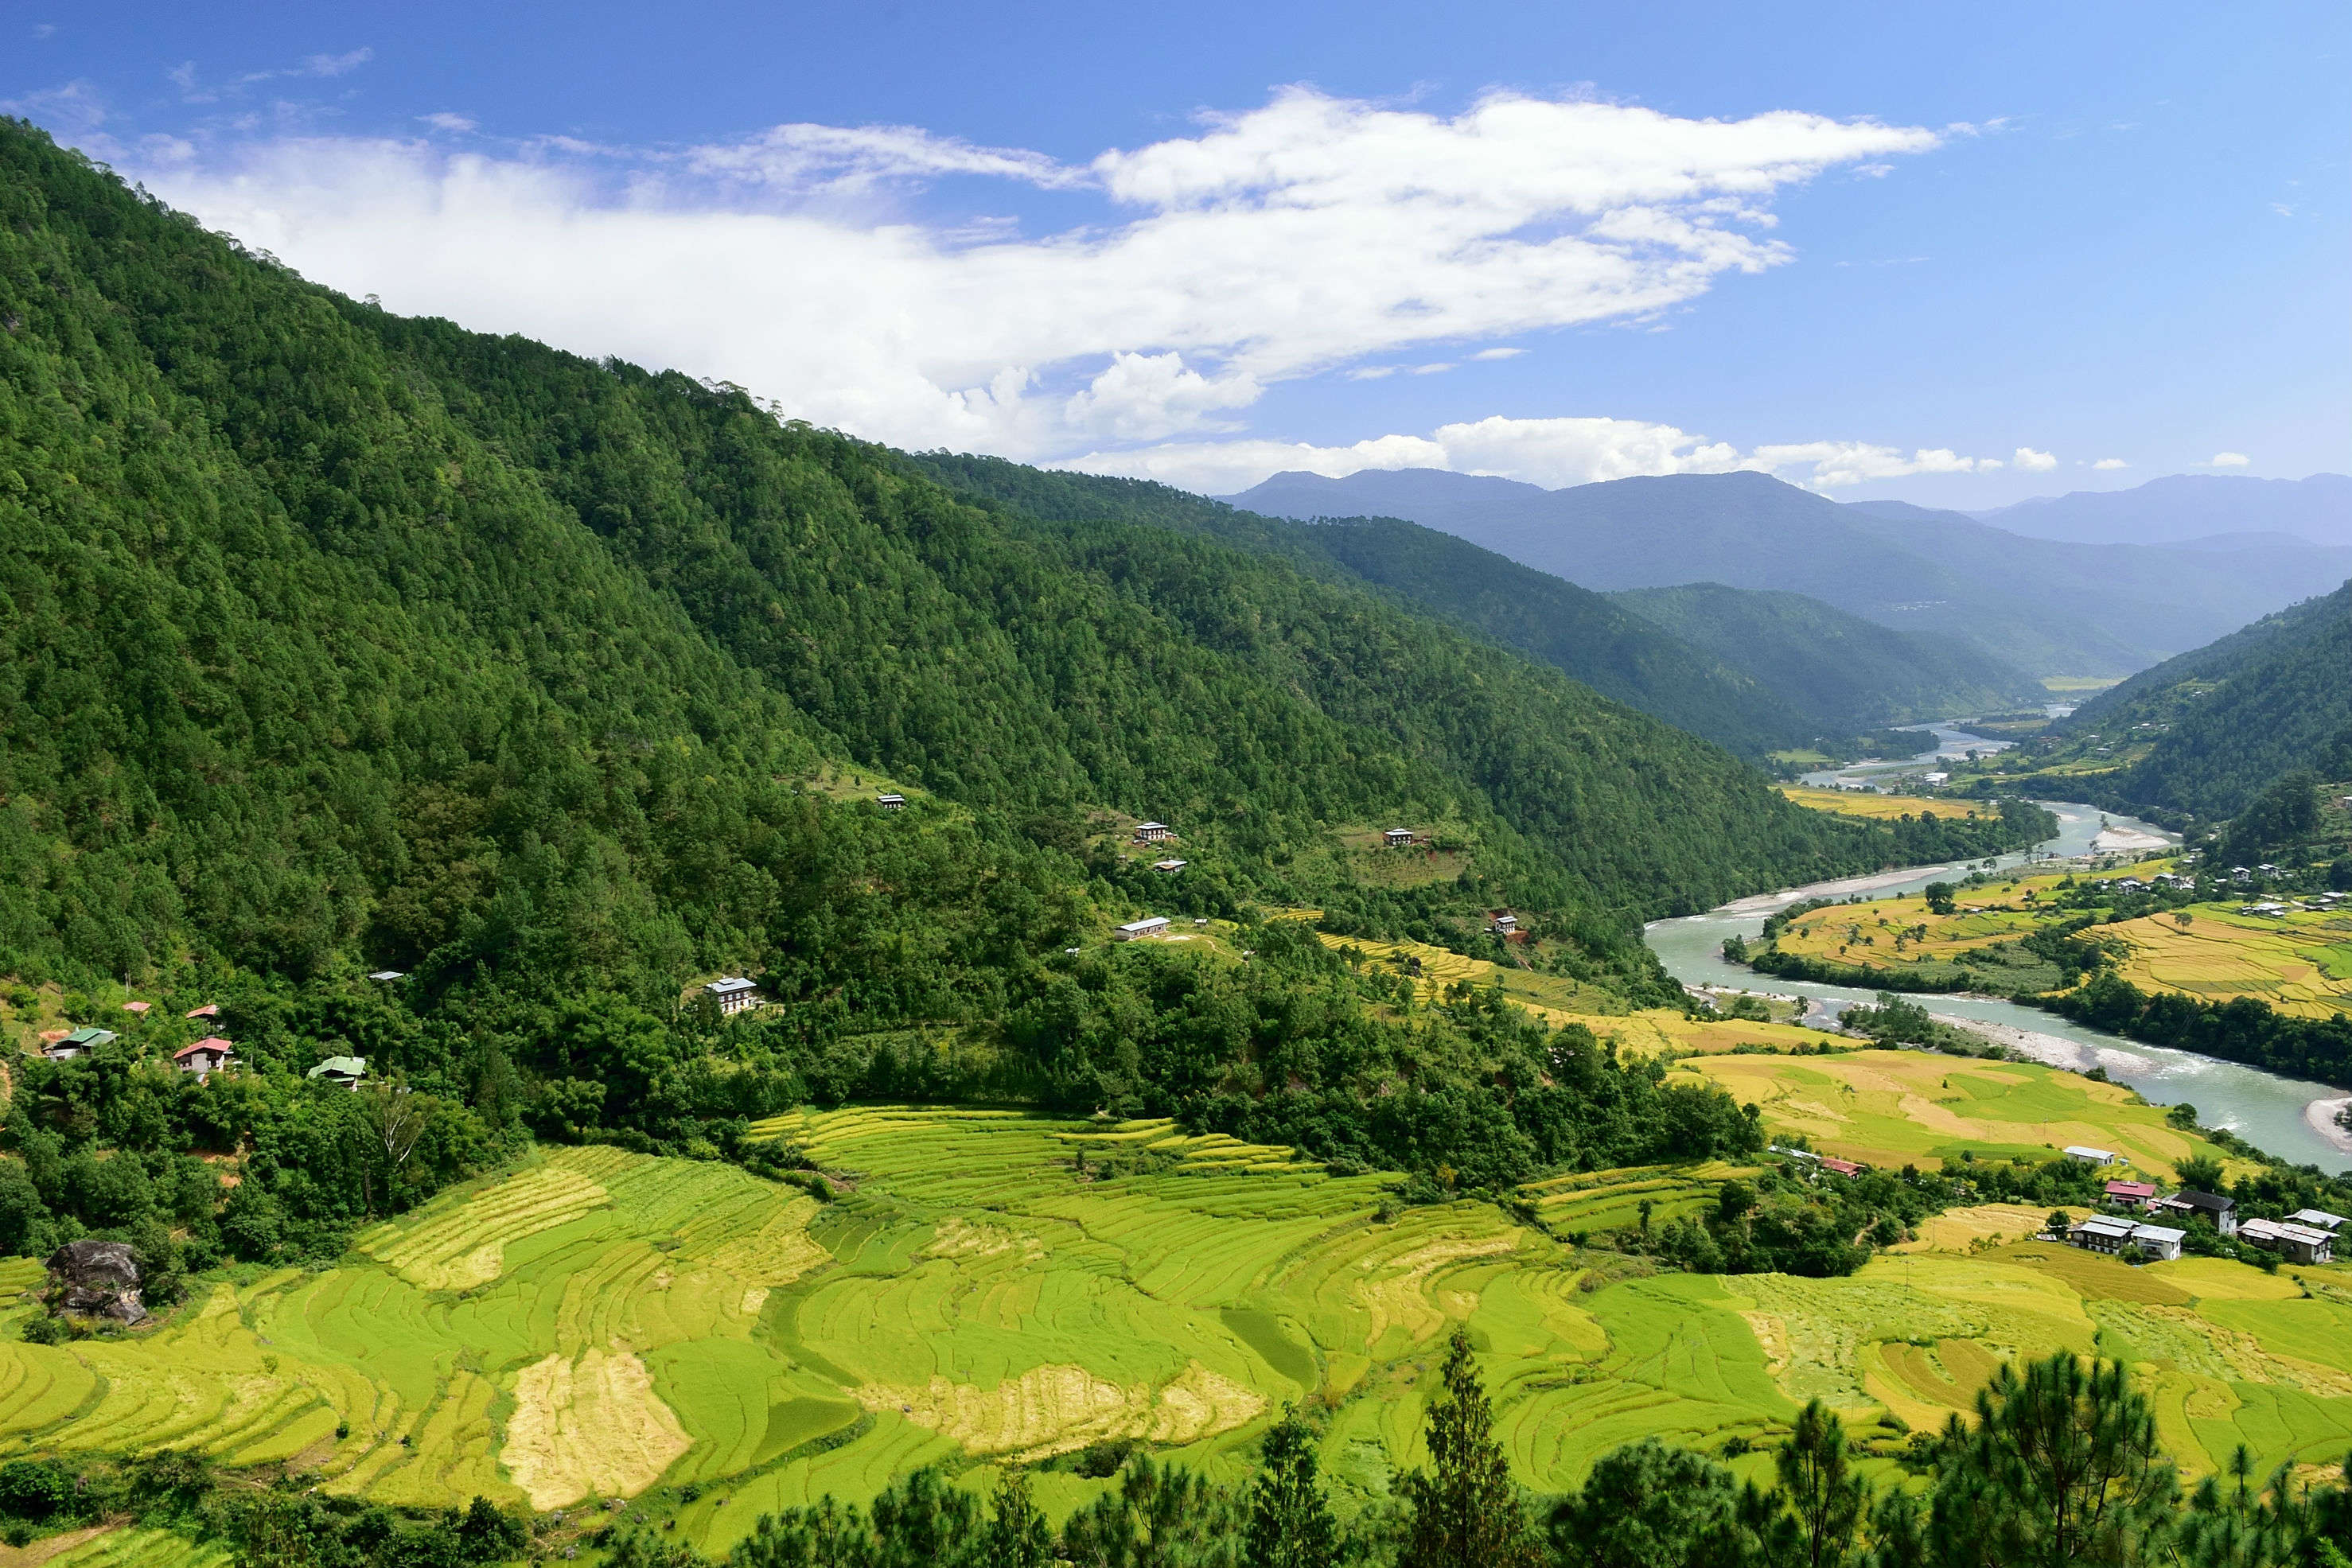 Bhutan to host 9th edition of Mountain Echoes Literary Festival in August